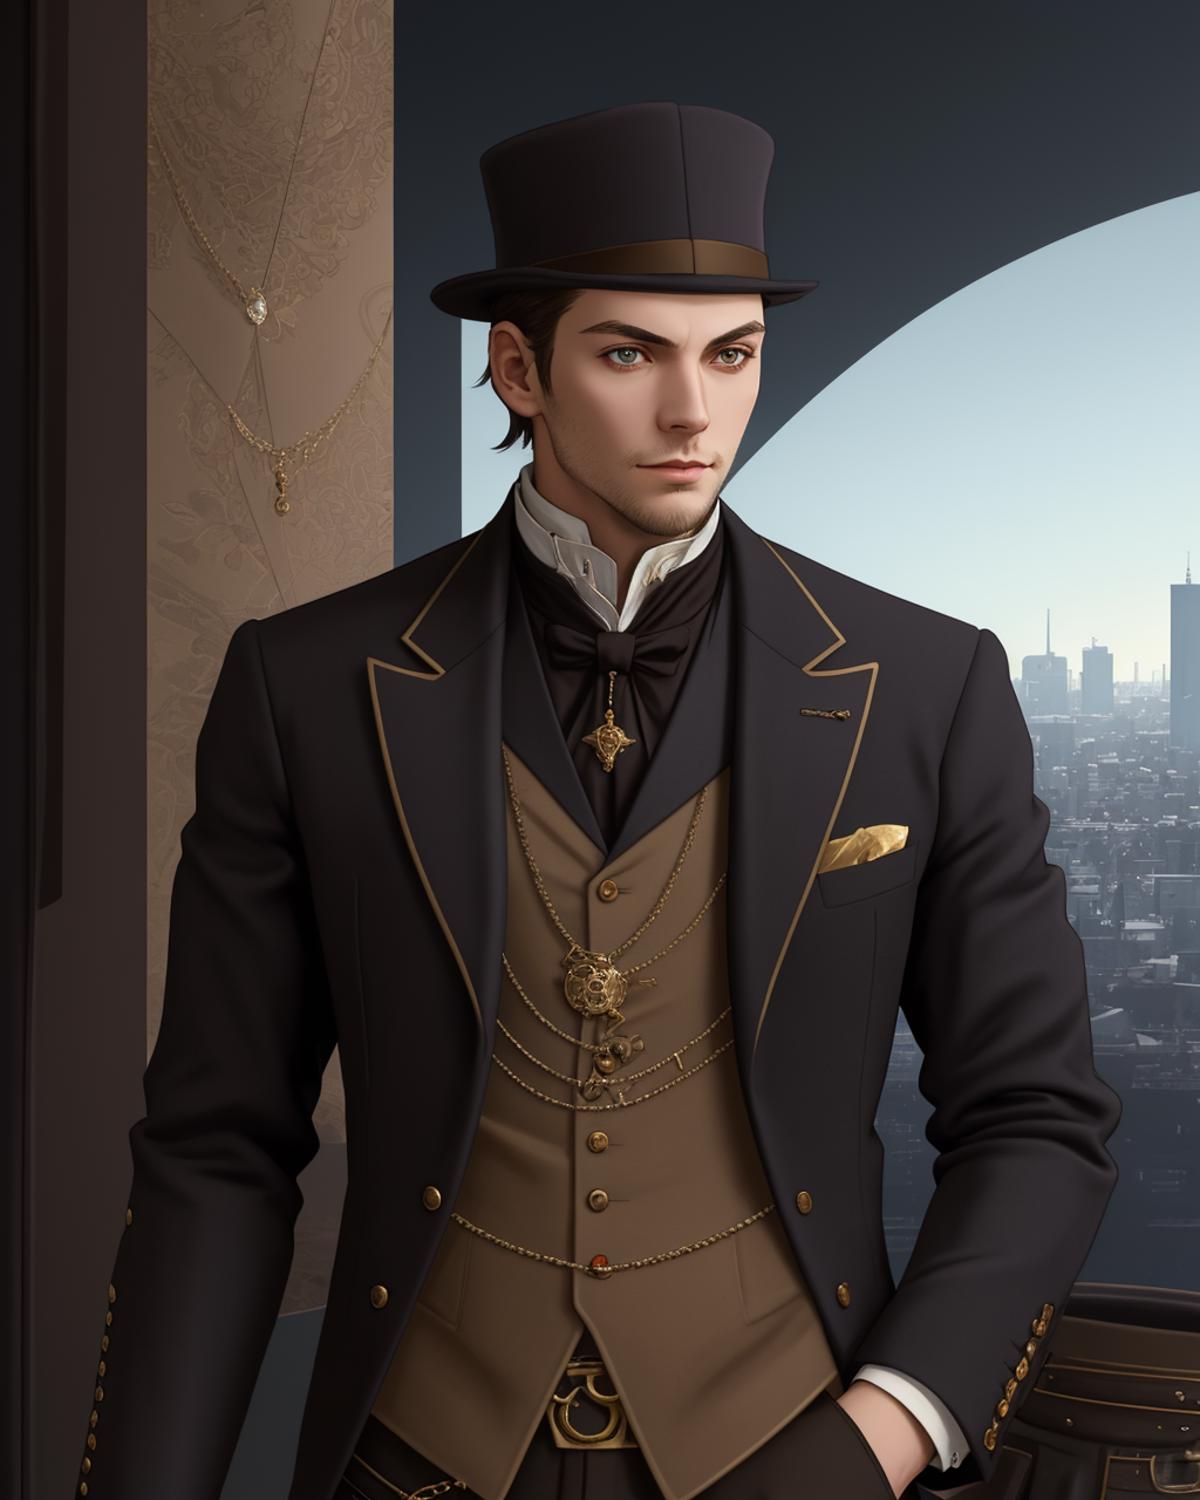 Steampunk(Victorian Age)style image by oosayam